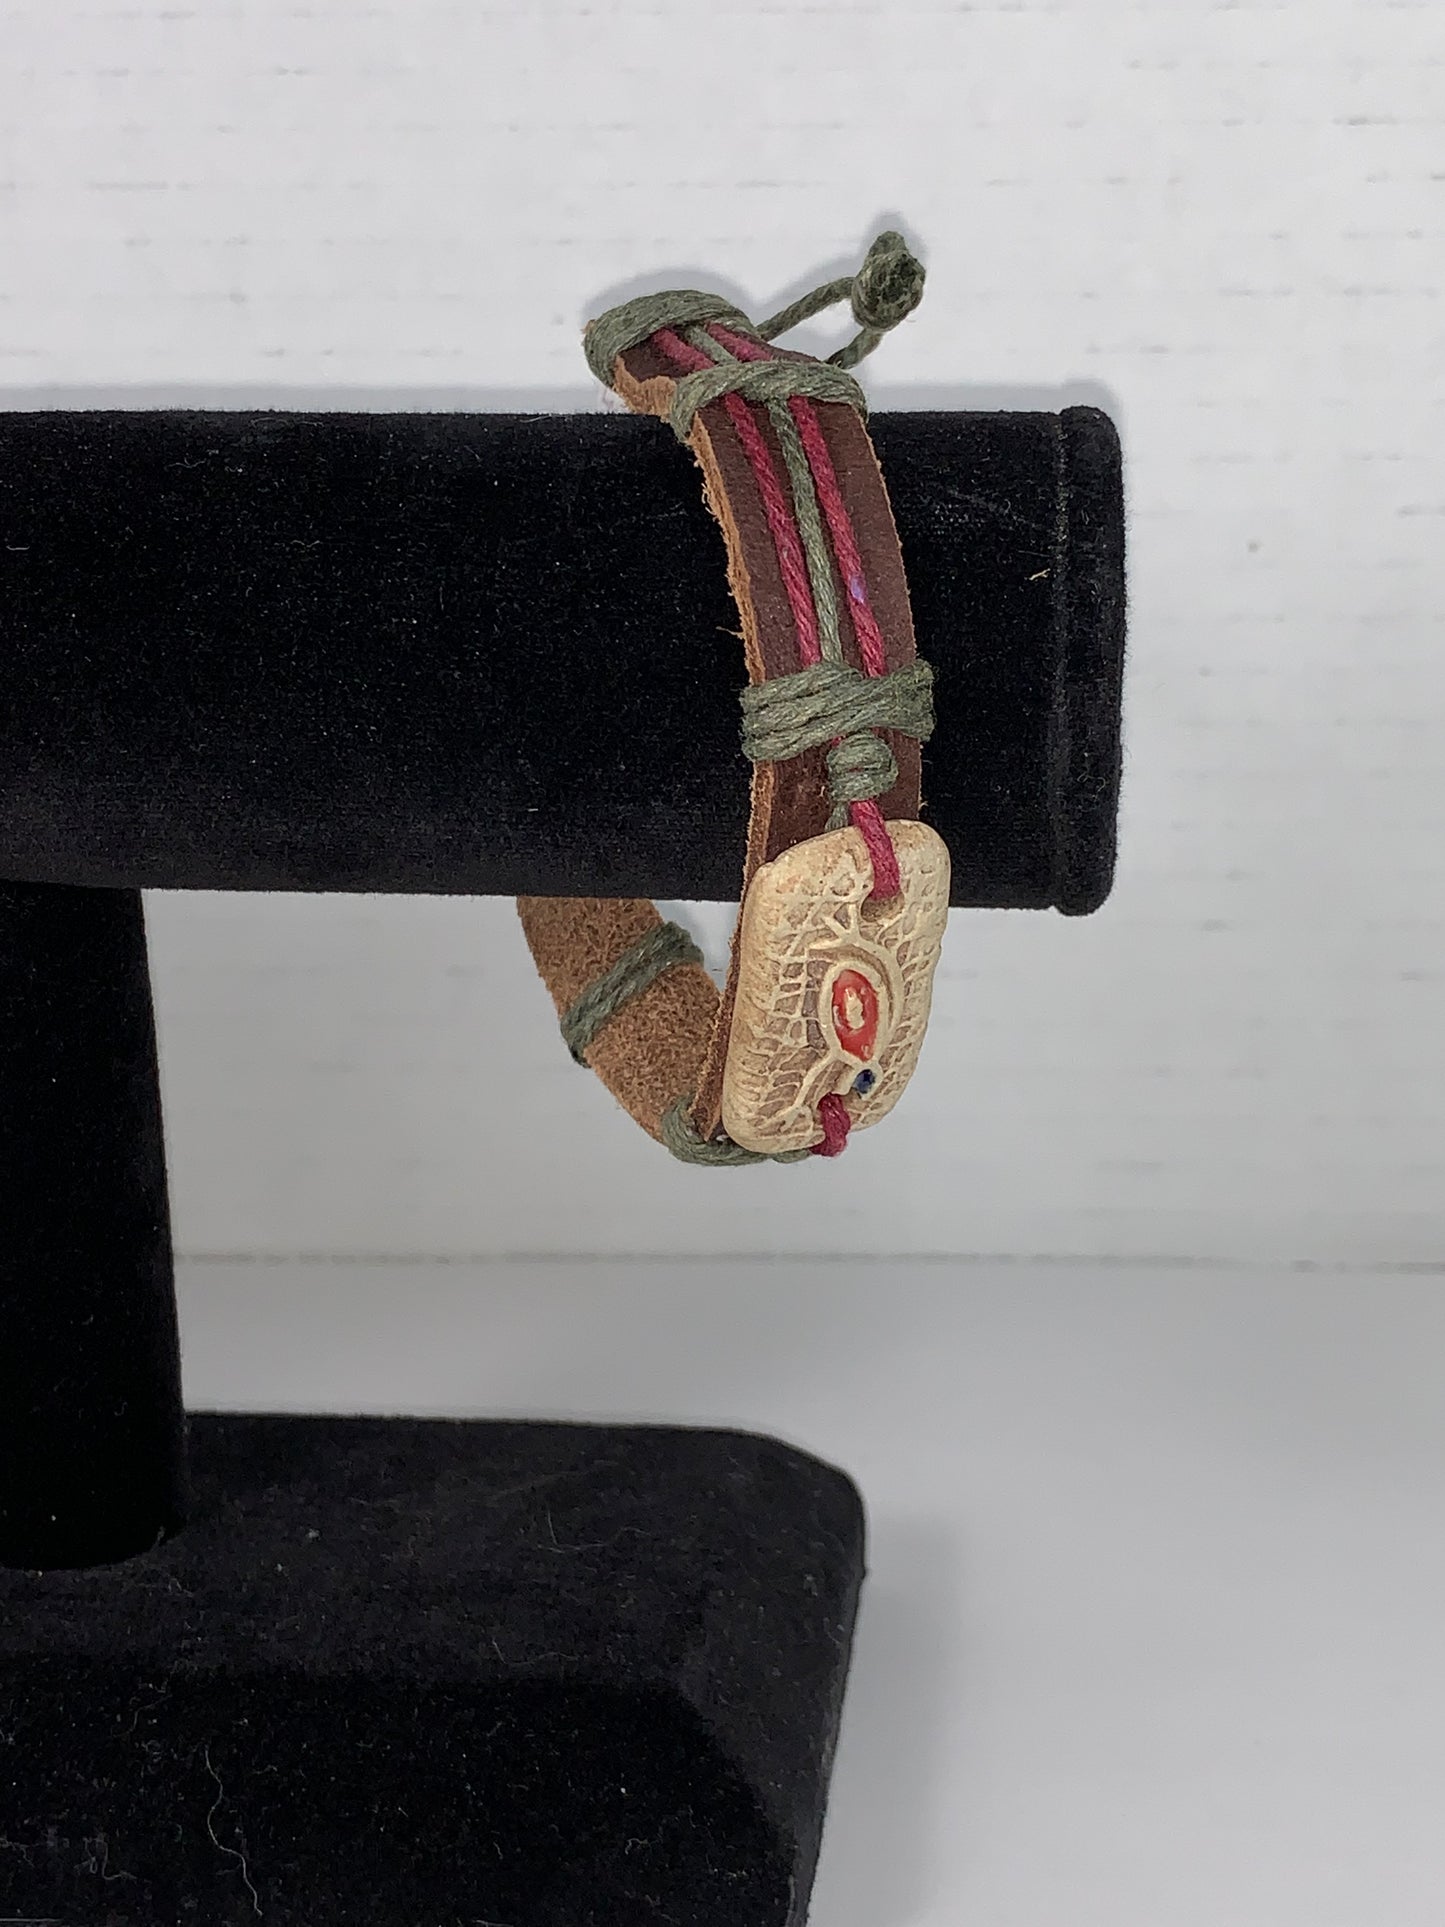 12" Long Leather Bracelet with Frog focal bead